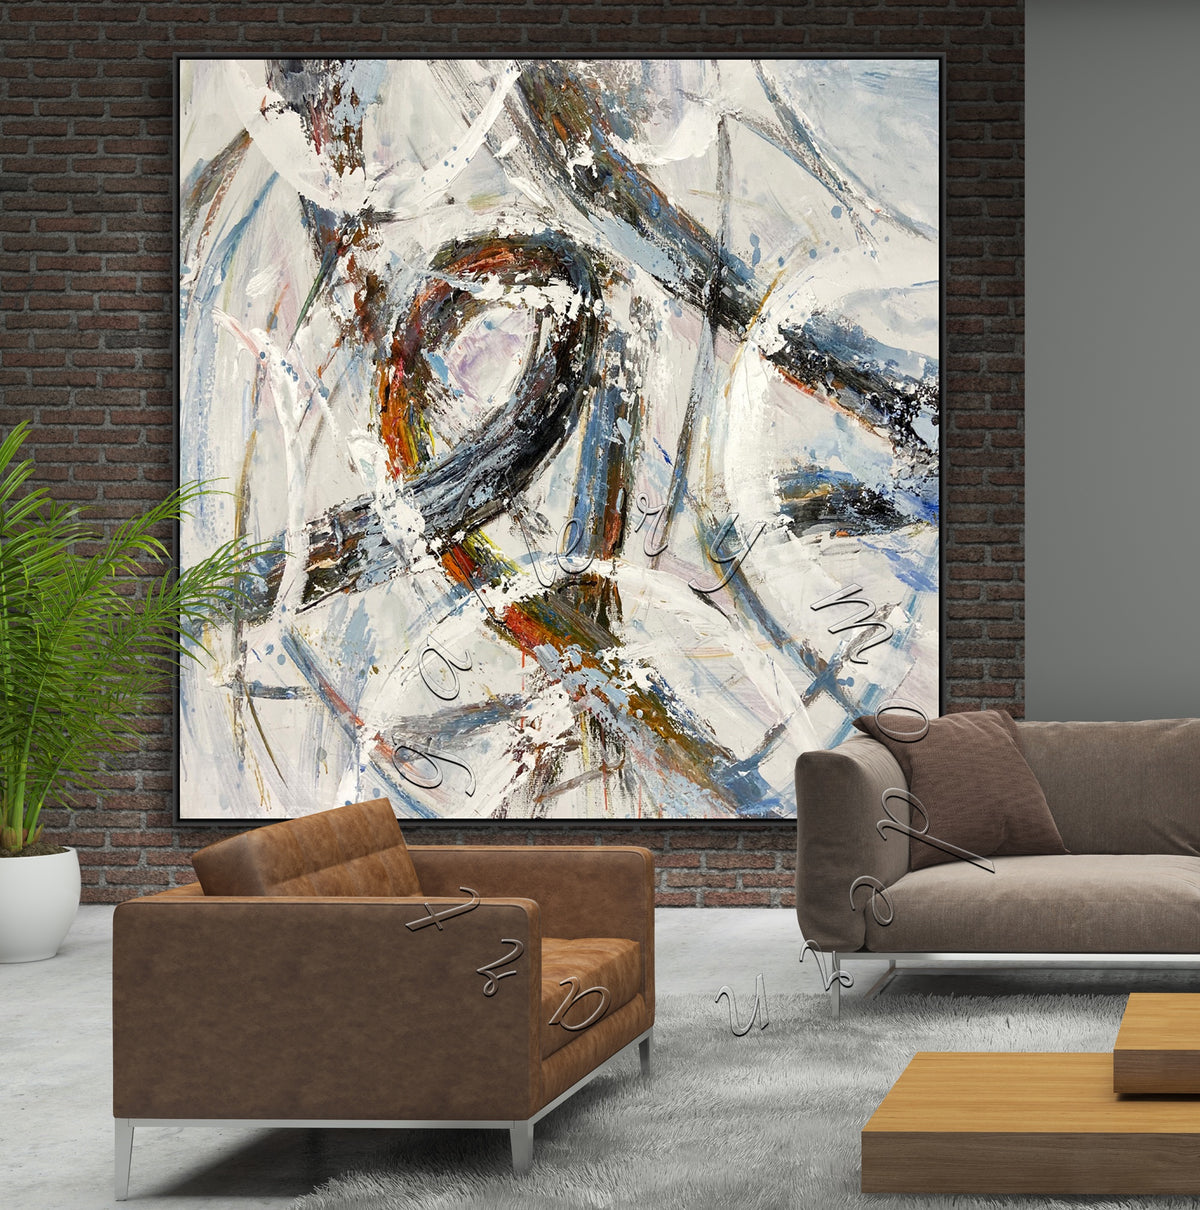 Large Abstract Canvas Painting, Texture Original Painting, Square Wall Art